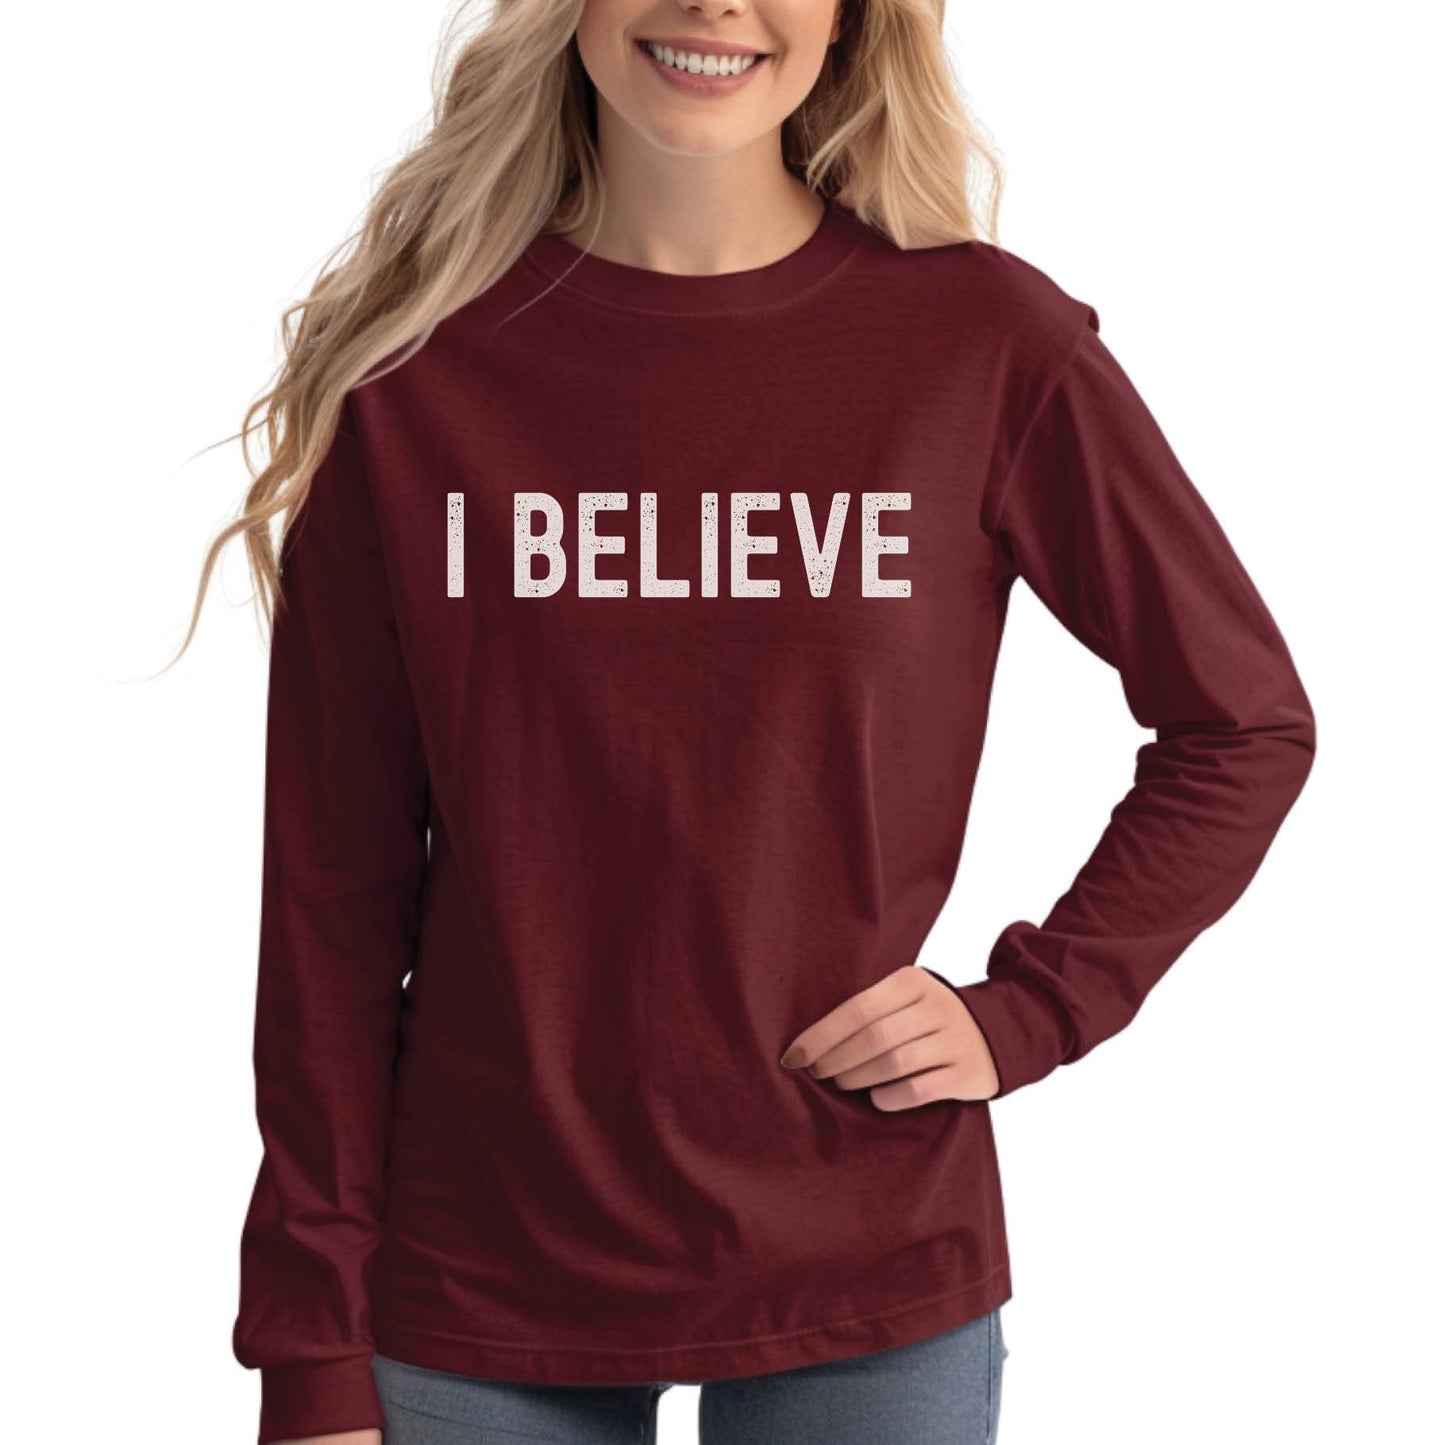 Young woman wearing a maroon burgundy cozy long sleeve t-shirt with a bold faith-based statement "I BELIEVE" distressed typography design printed in white, created for Christian men and women Jesus believers